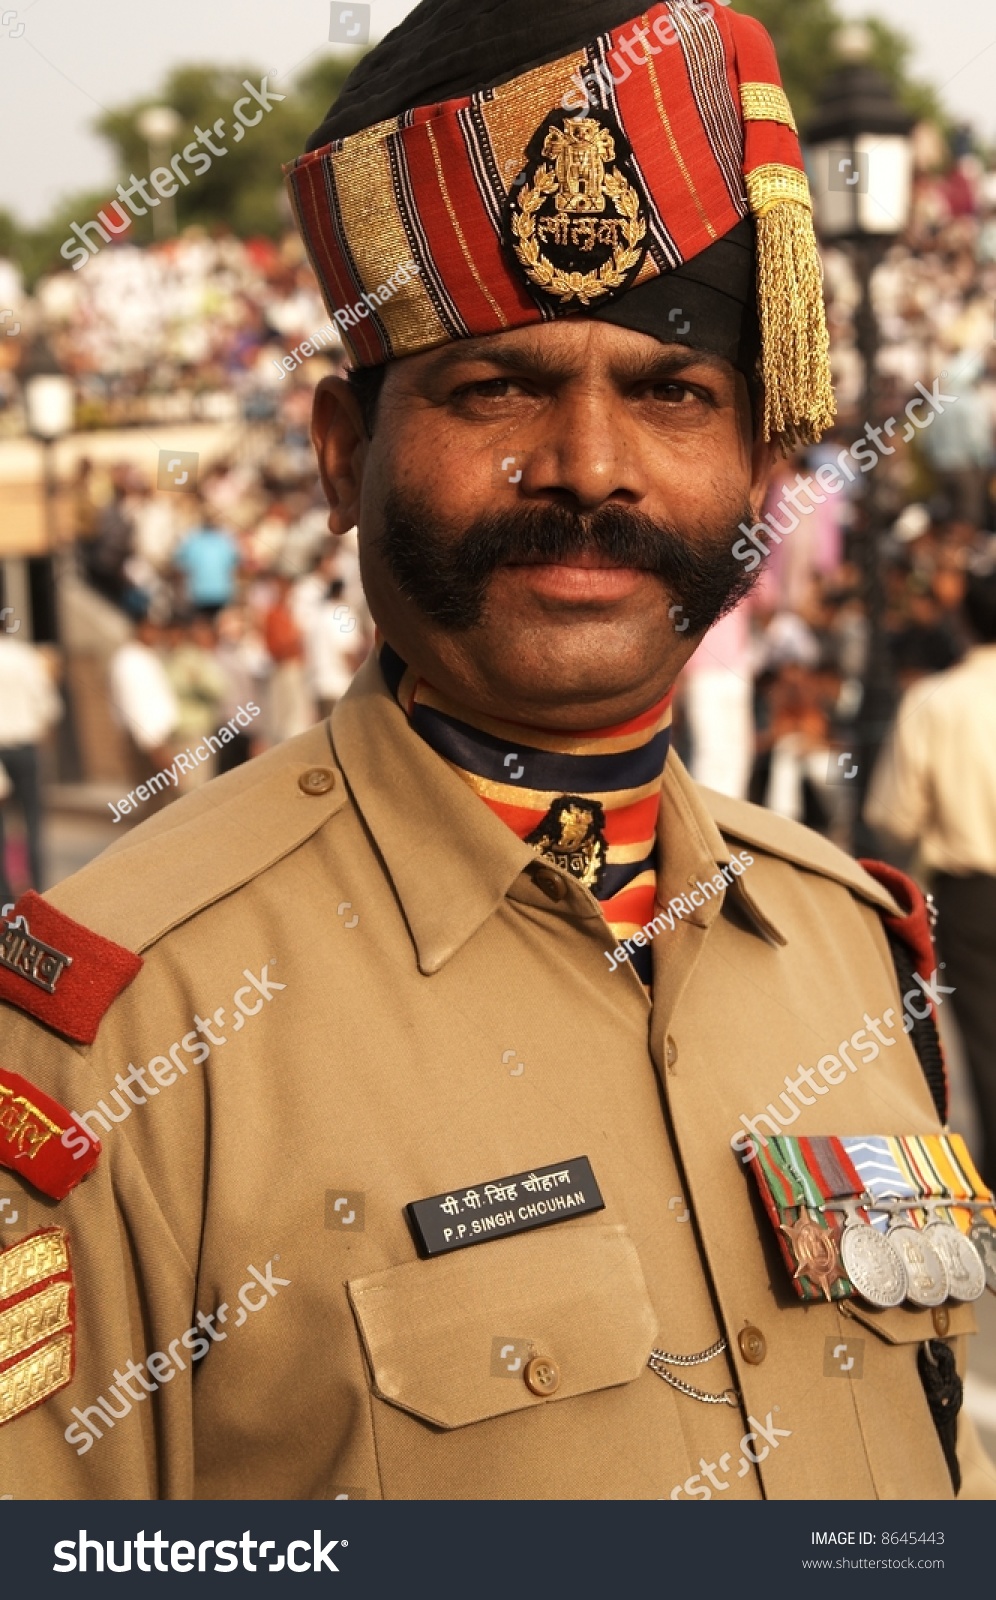 Imposing Indian Soldier With Bushy Mustache In Dress Uniform Wagah Boarder Post Between India And Pakistan Chauhan and answer by mr. https www shutterstock com de image photo imposing indian soldier bushy mustache dress 8645443